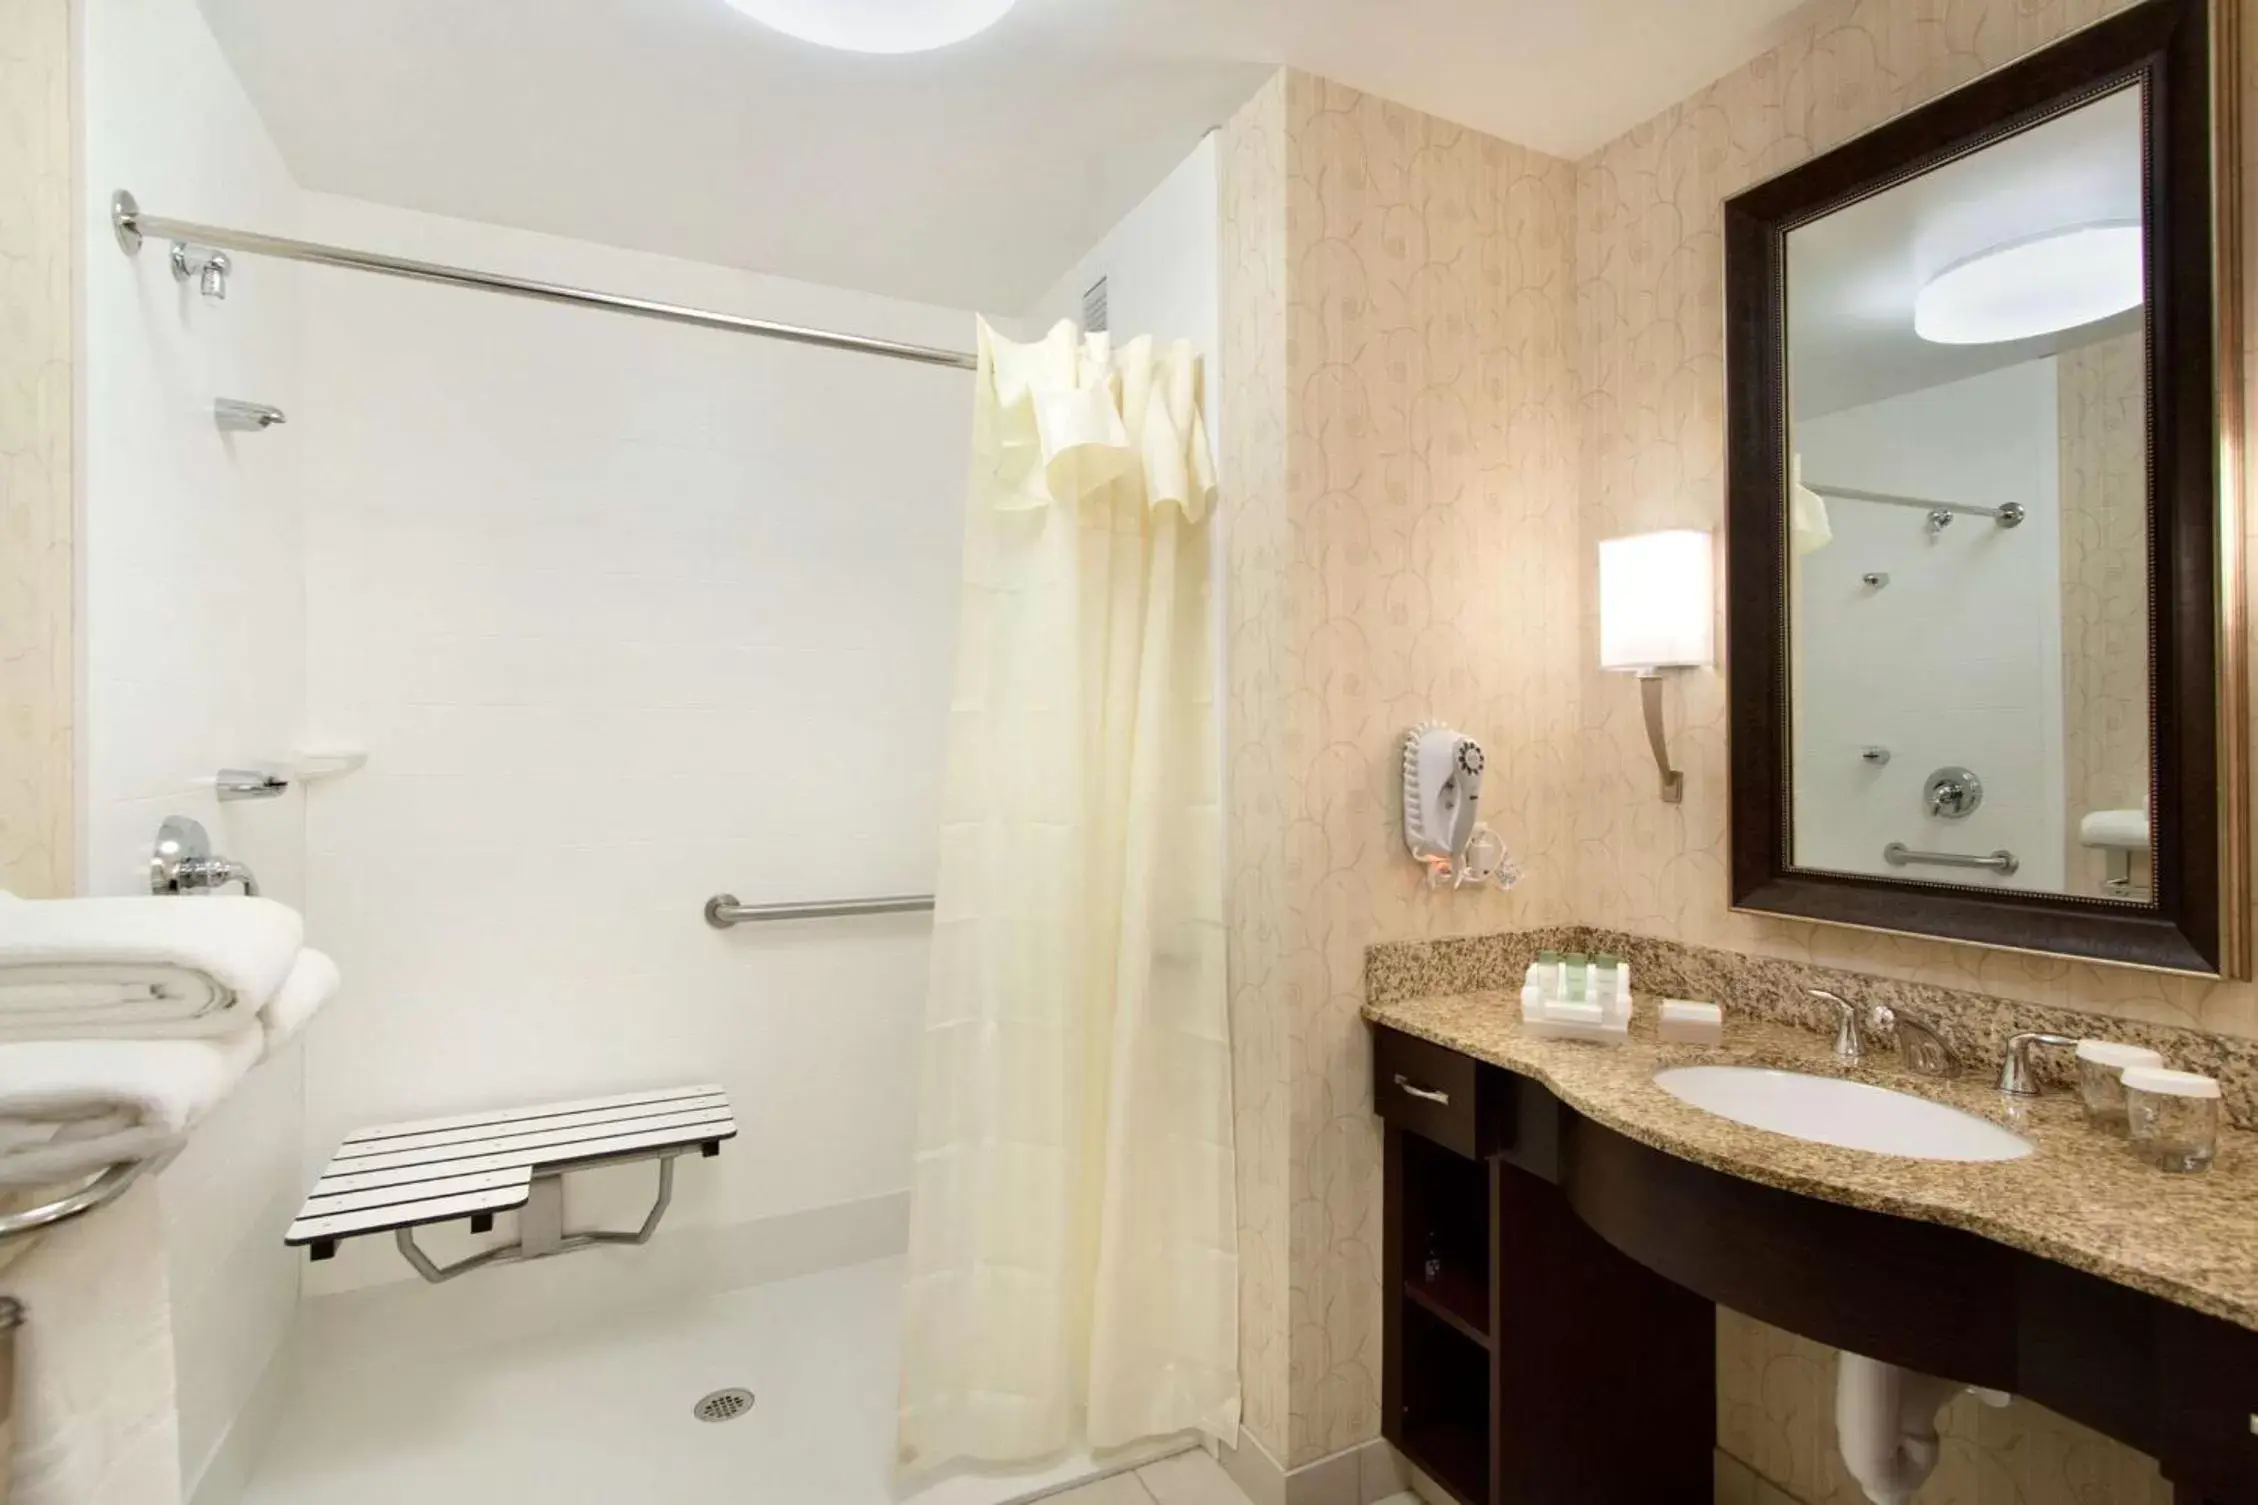 Bathroom in Homewood Suites by Hilton Rochester/Greece, NY